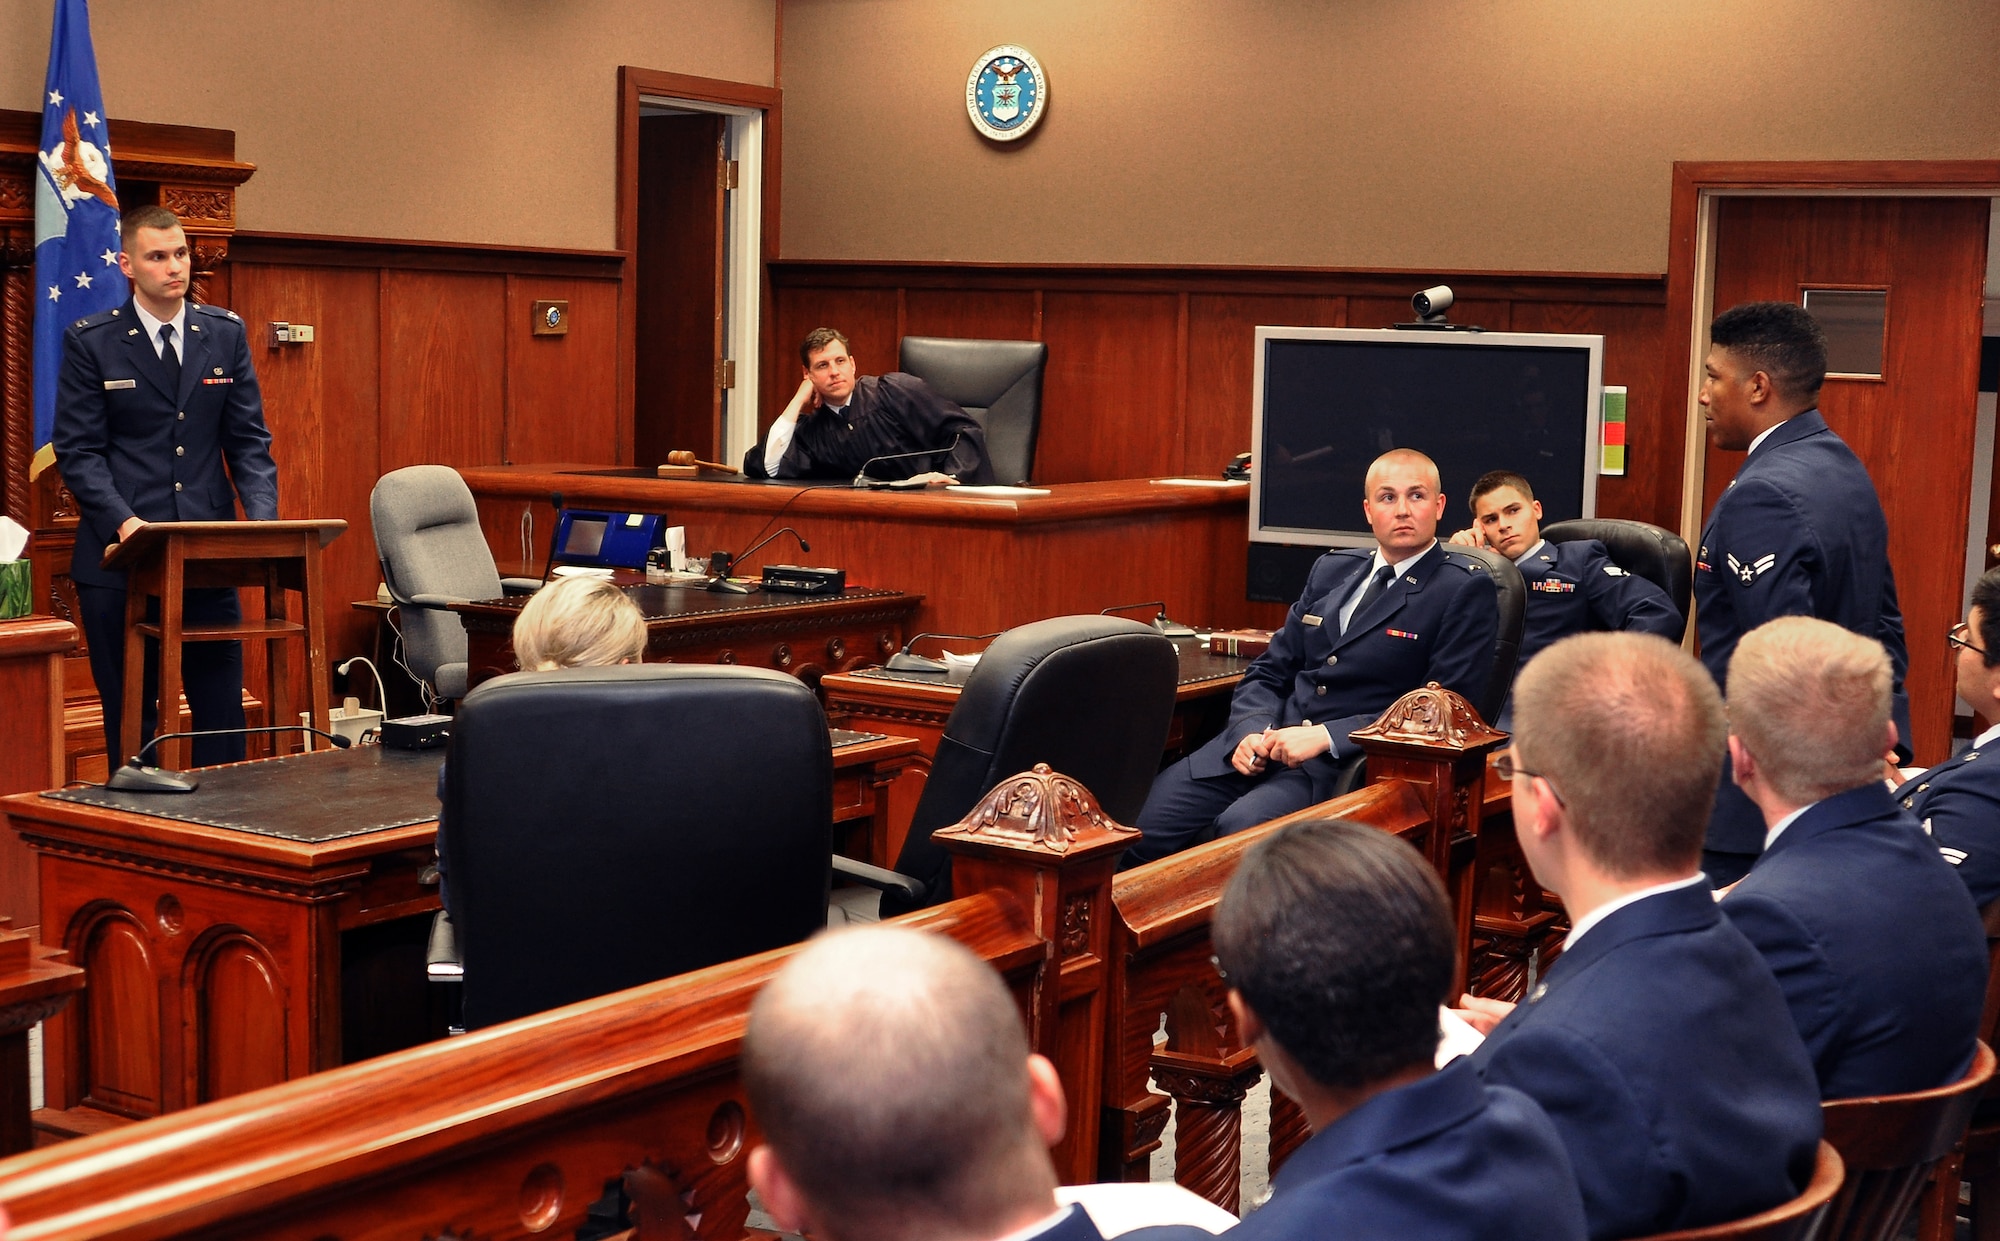 Airman 1st Class Mychal Allen (right) asks Capt. Dave Rolek questions during the first ever ‘mock trial’ held June 9, 2014, inside the Offutt Air Force Base Courtroom, Neb. All Airmen attending the week-long First Term Airmen’s Center orientation course will participate in a mock trial as part of their training. The 55th Wing Legal Office created the program with the goal of preventing sexual assault through education and awareness. Allen is from the 55th Maintenance Squadron and Rolek is a 55th Wing assistant staff judge advocate.  (U. S. Air Force photo/Delanie Stafford)